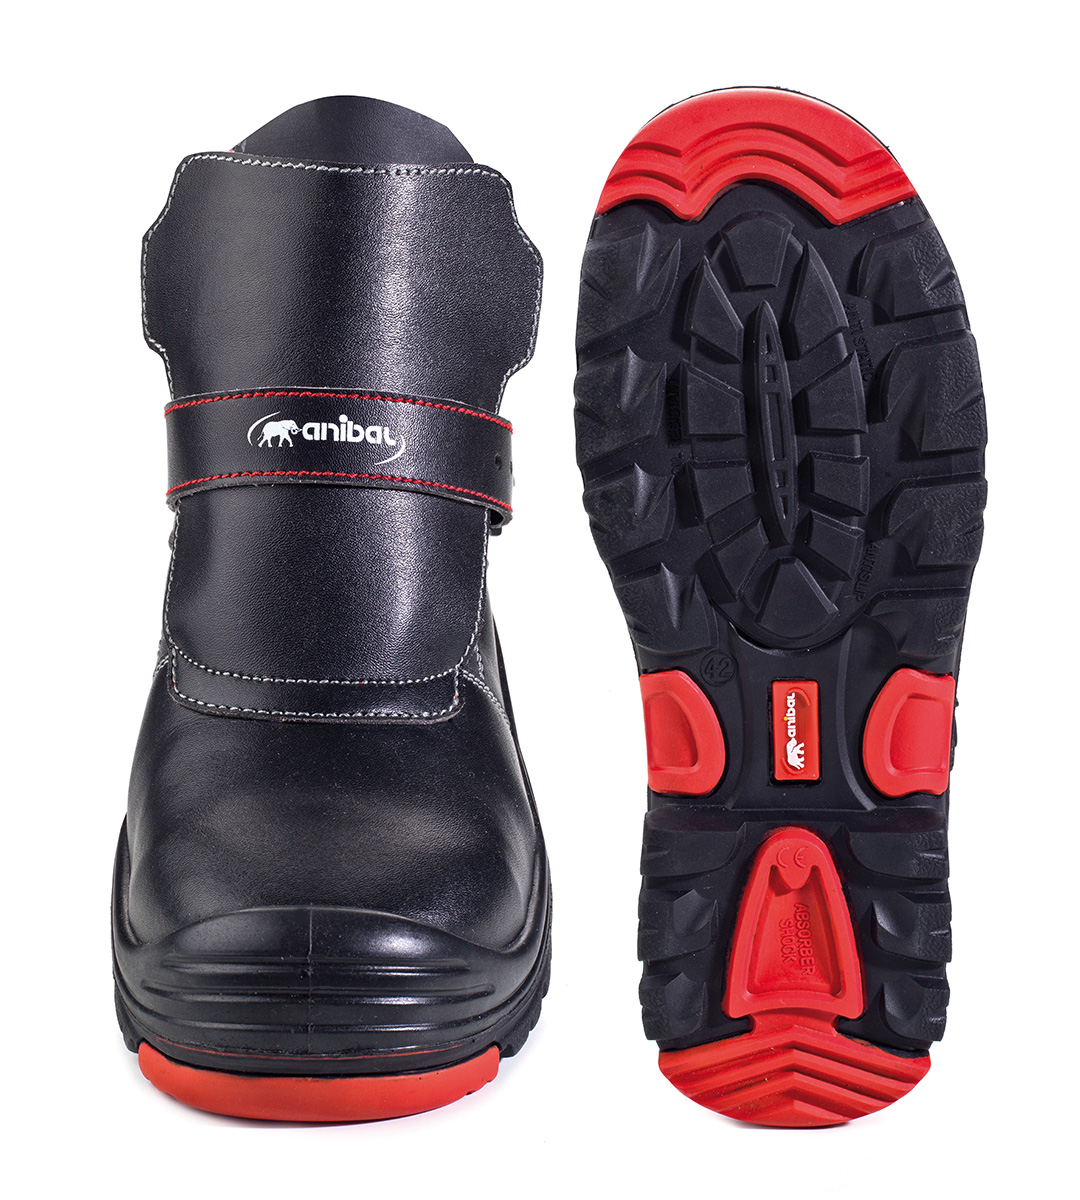 1688-BGNR Safety Footwear PU/Nitrilo Bota mod. “TRAJANO”.
Microfiber boots in S3 with double density sole Polyurethane / Rubber Nitrile. 